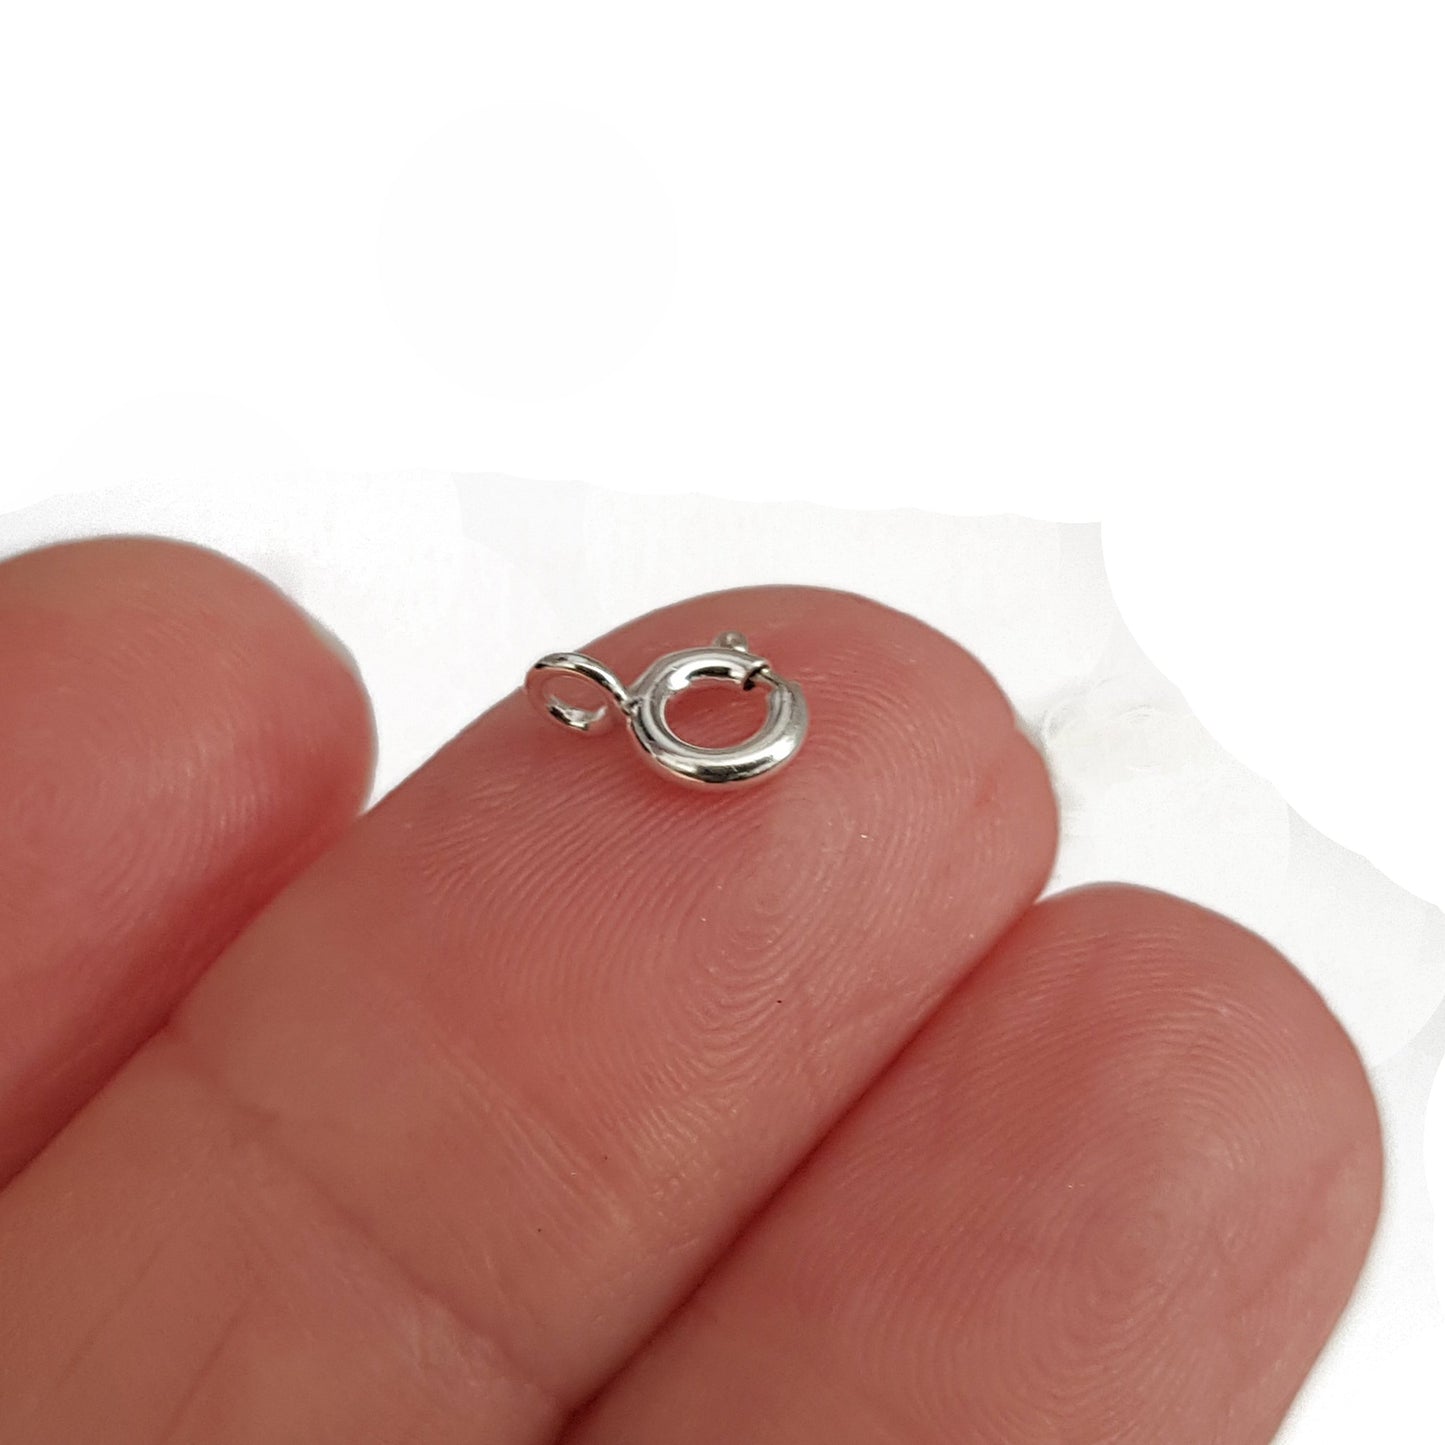 Bolt Ring Clasp 5mm Sterling Silver 3pcs | SS-022BR5 | Jewellery Supply - Kalitheo Jewellery